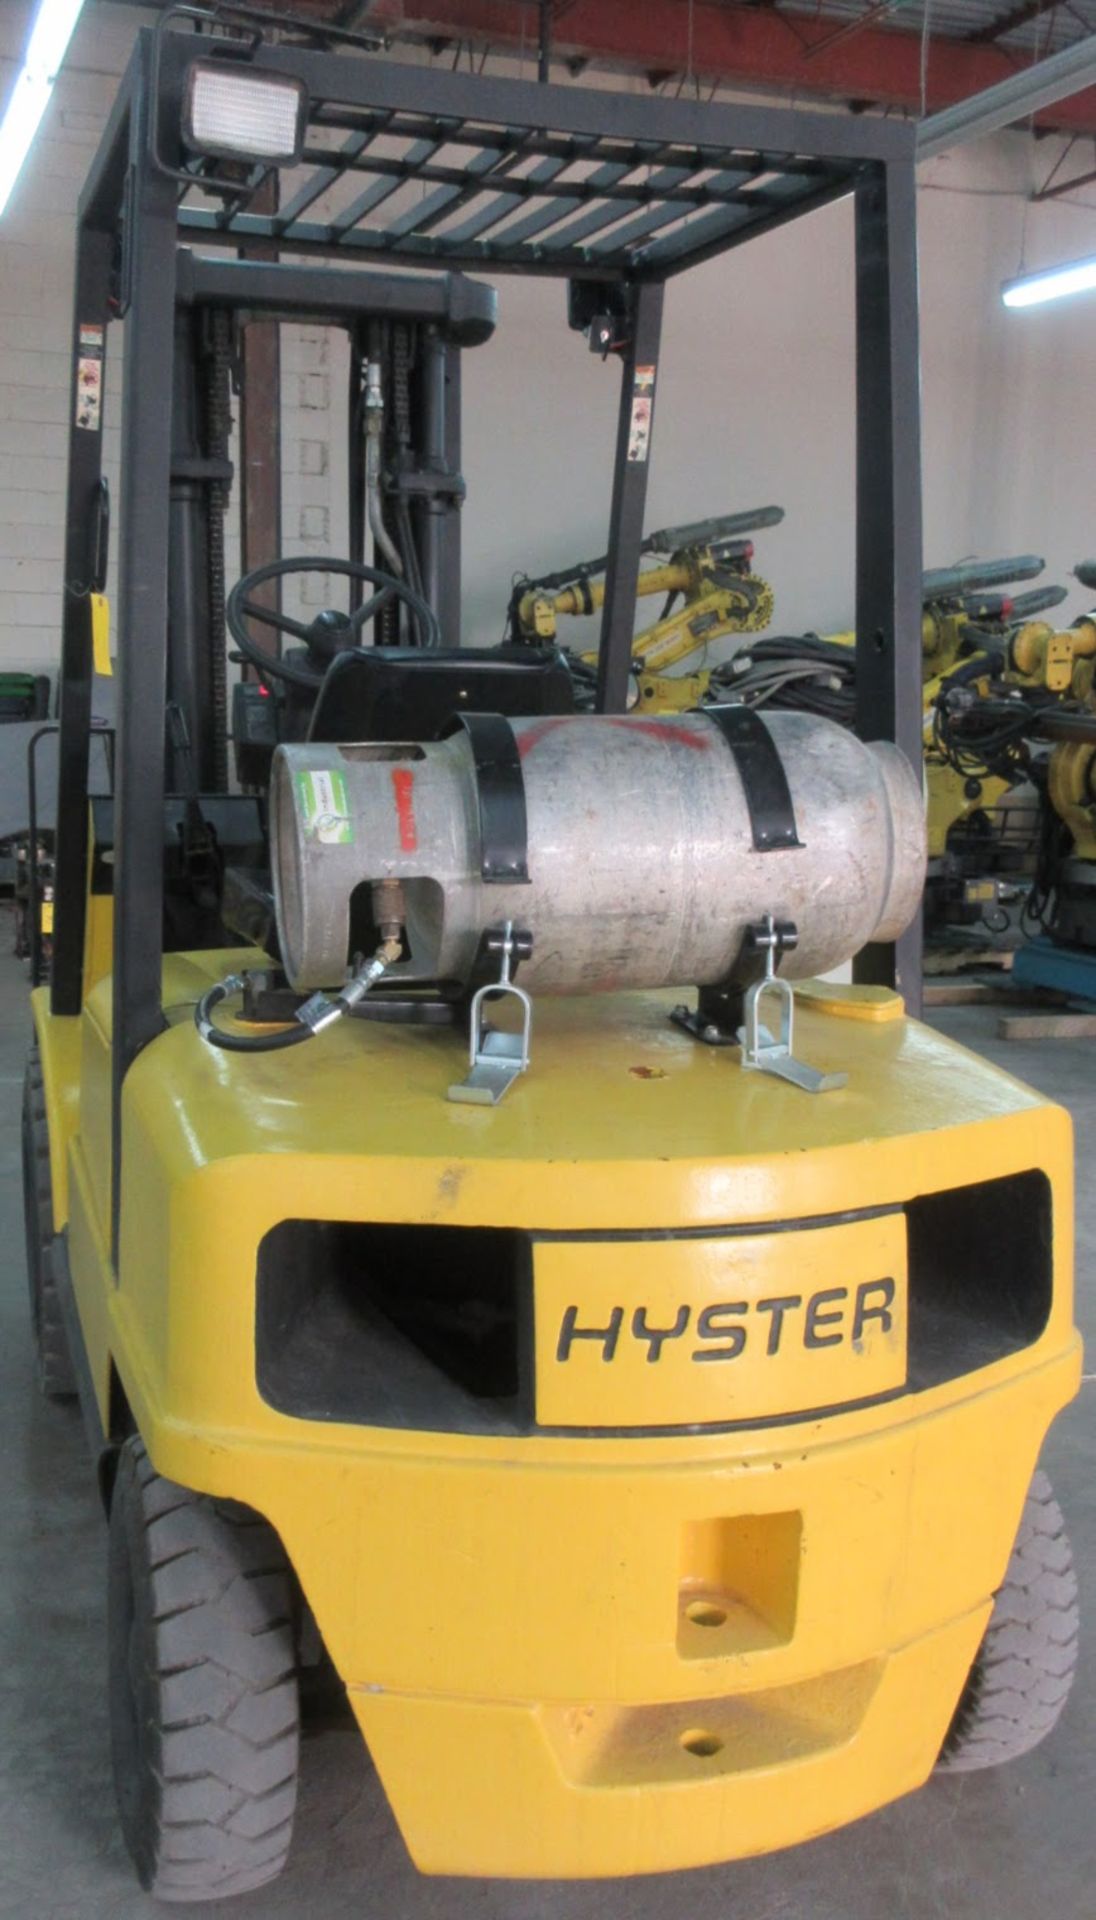 HYSTER H50XM OUTDOOR PROPANE FORKLIFT, 4,850LB CAP., 189" MAX LIFT, 40" FORKS, 3-STAGE MAST, SIDE - Image 4 of 6